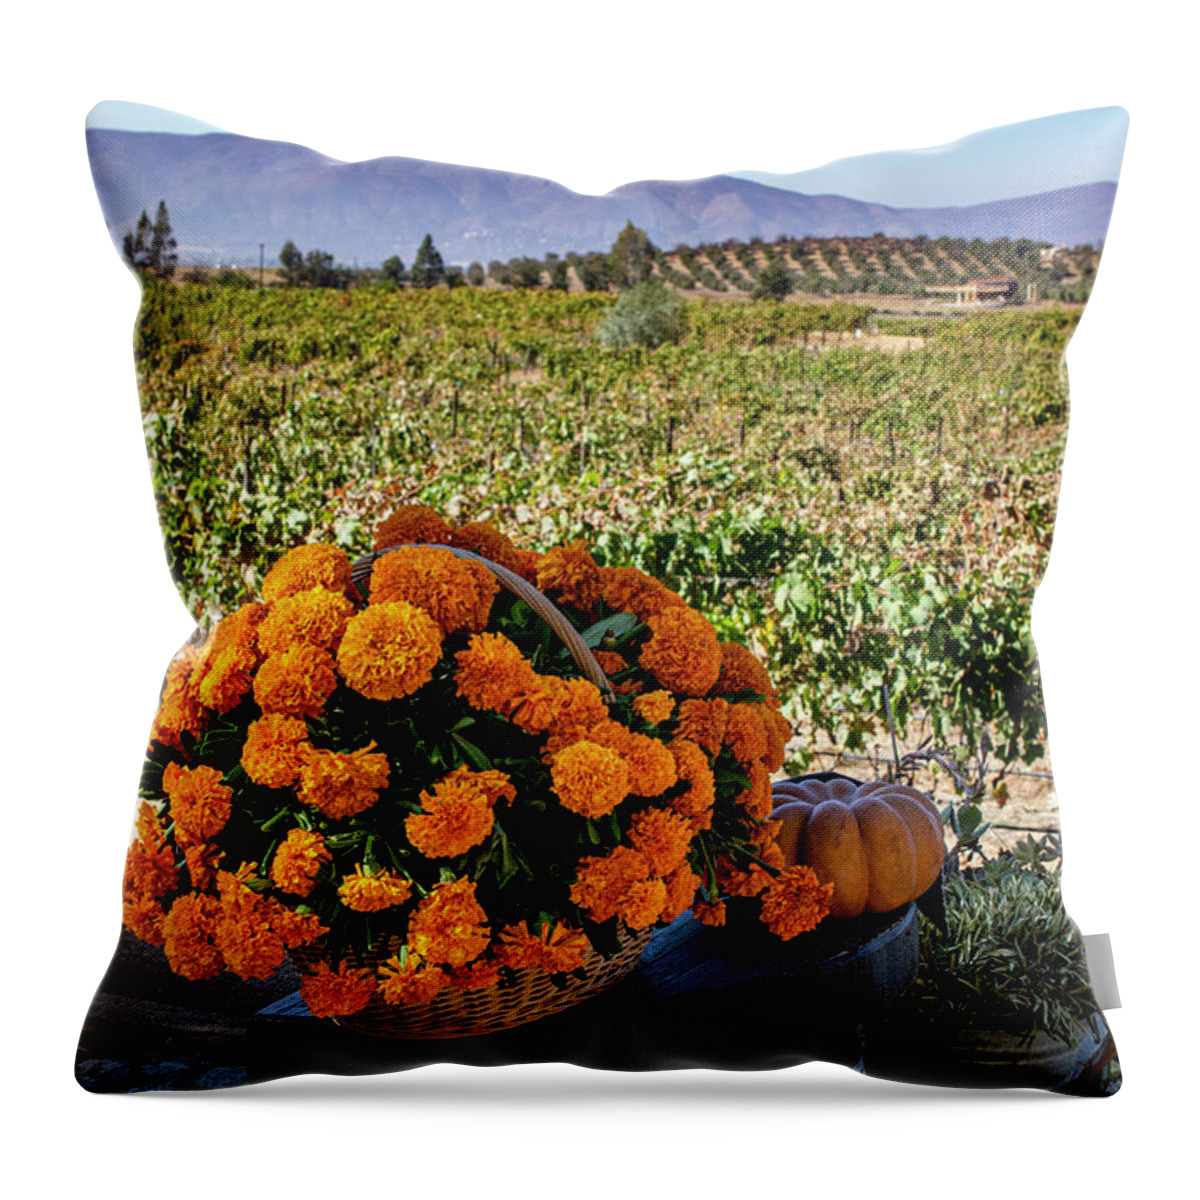 Marigolds Throw Pillow featuring the photograph Valley Marigolds by William Scott Koenig